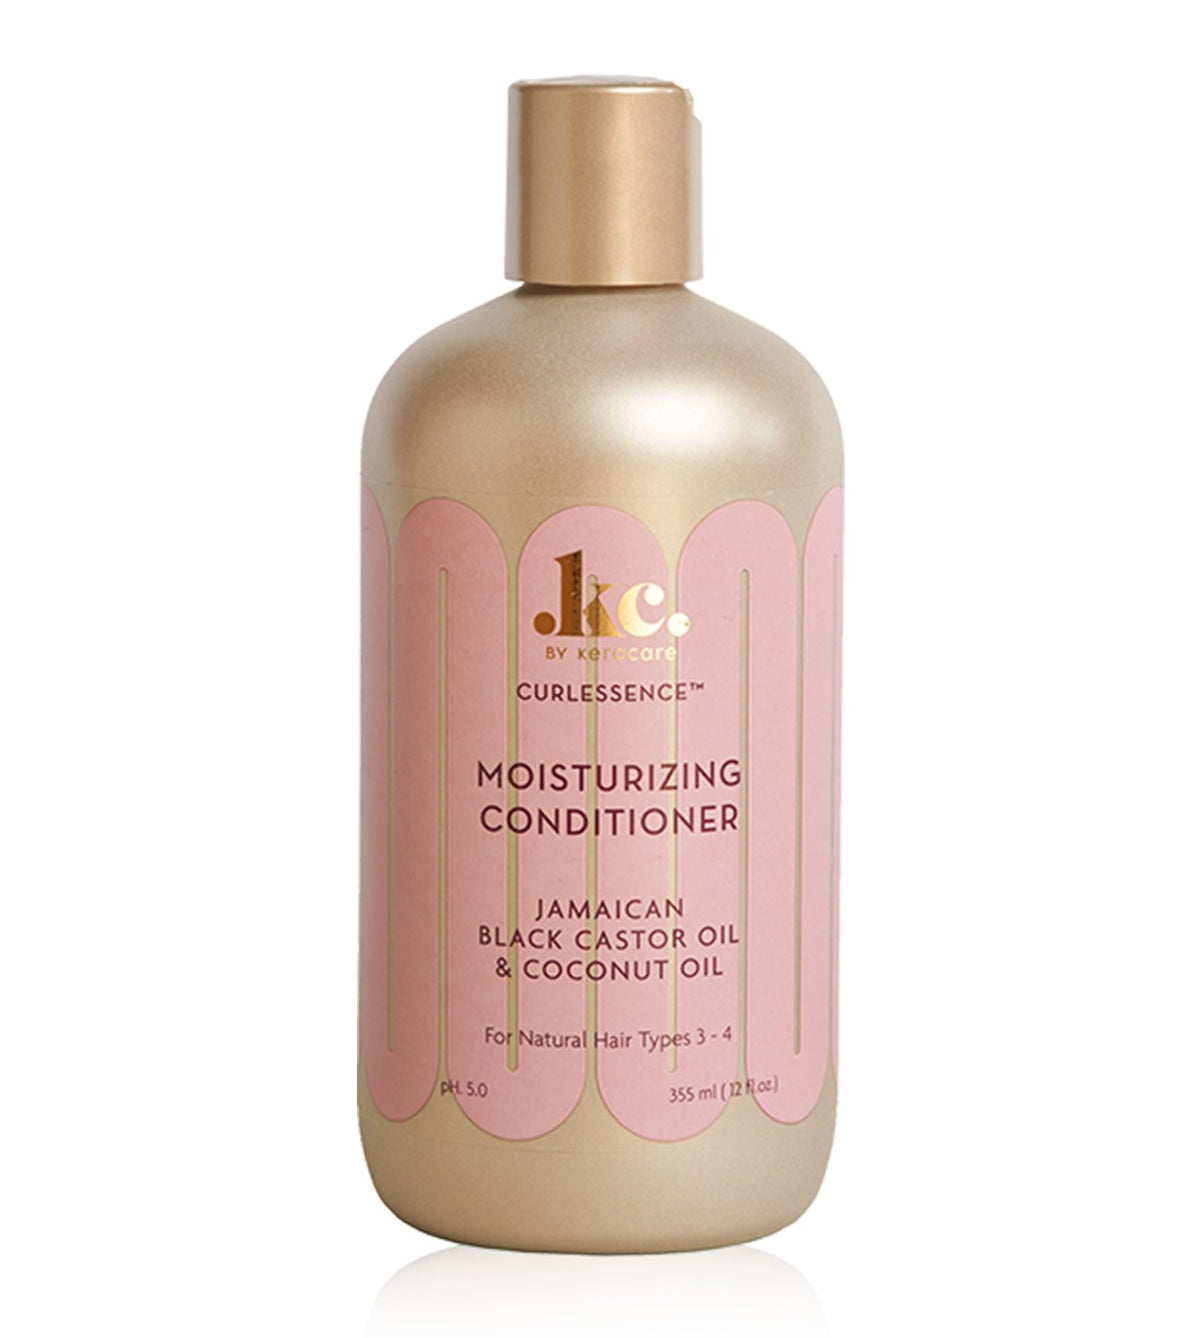 Keracare Curlessence Conditioner 335ml 